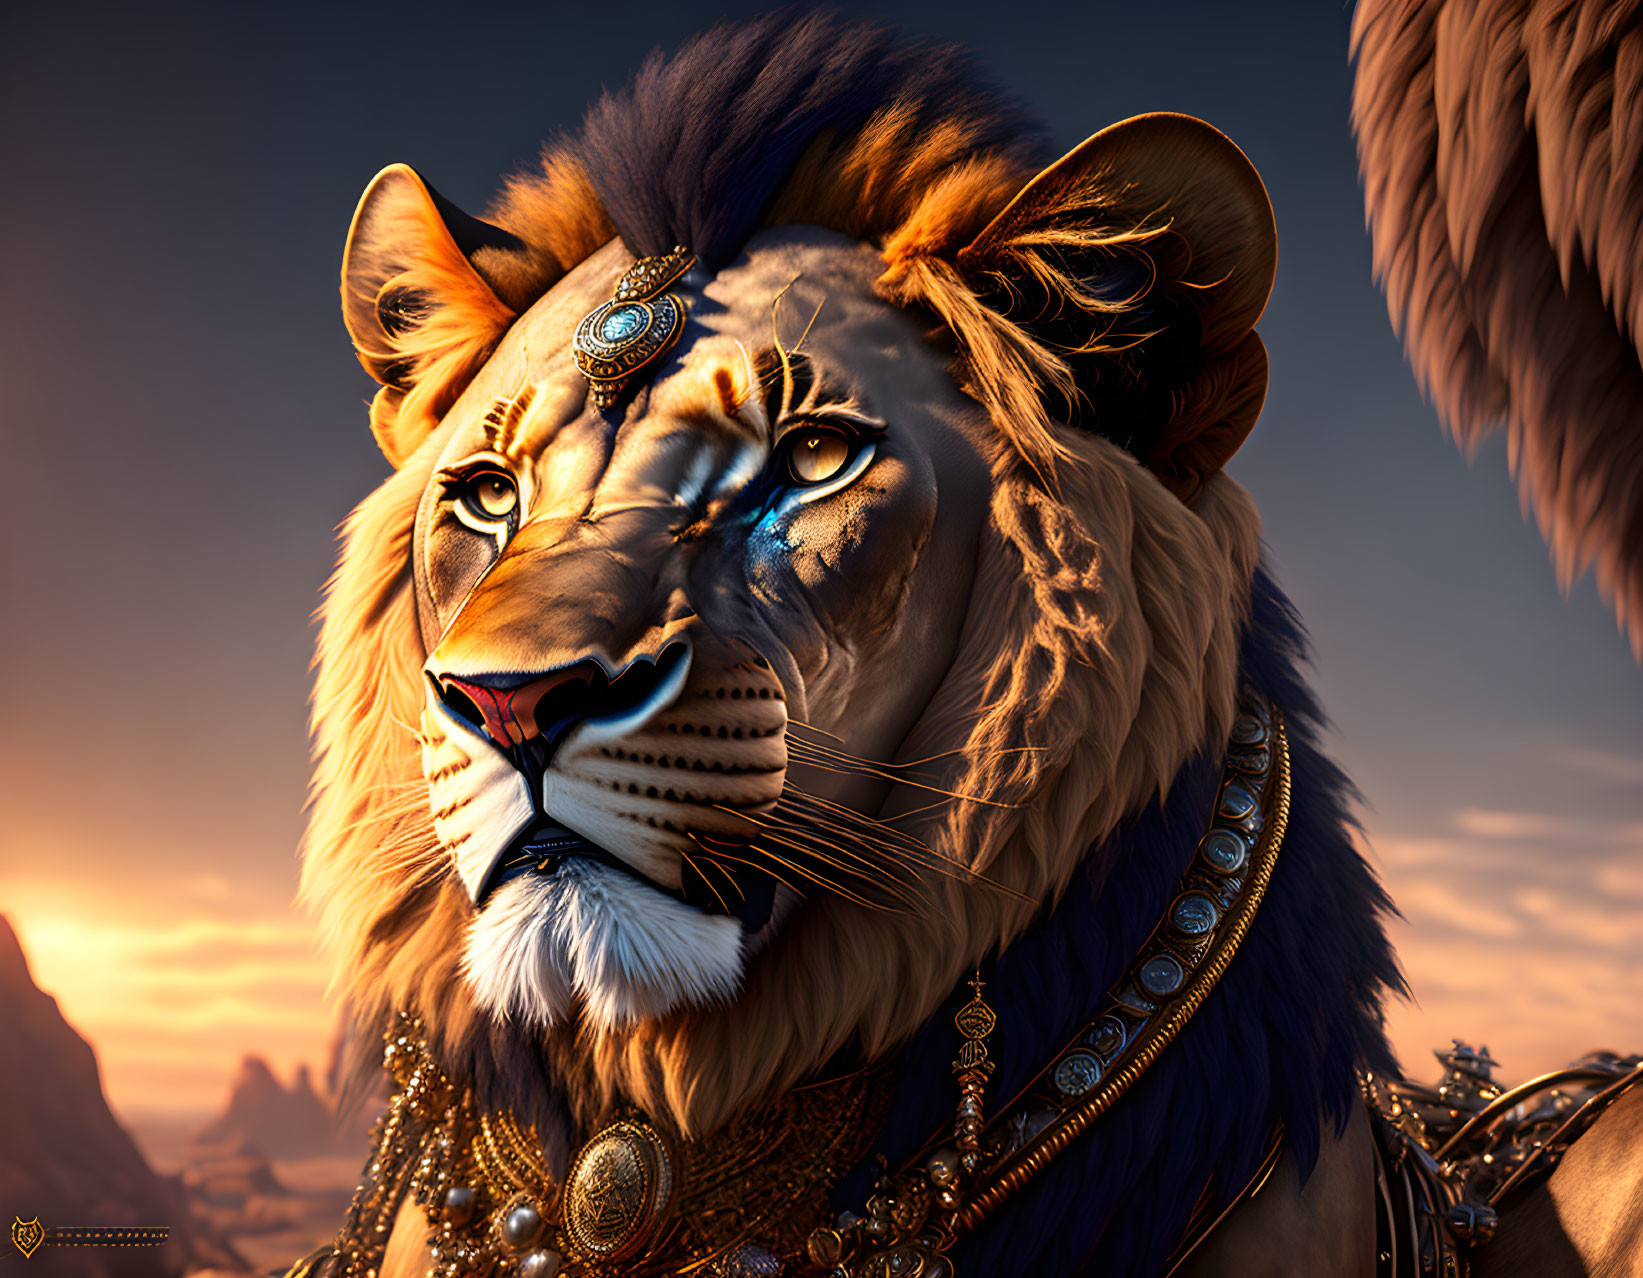 Anthropomorphic lion with blue eyes and jewelry against dusky sky